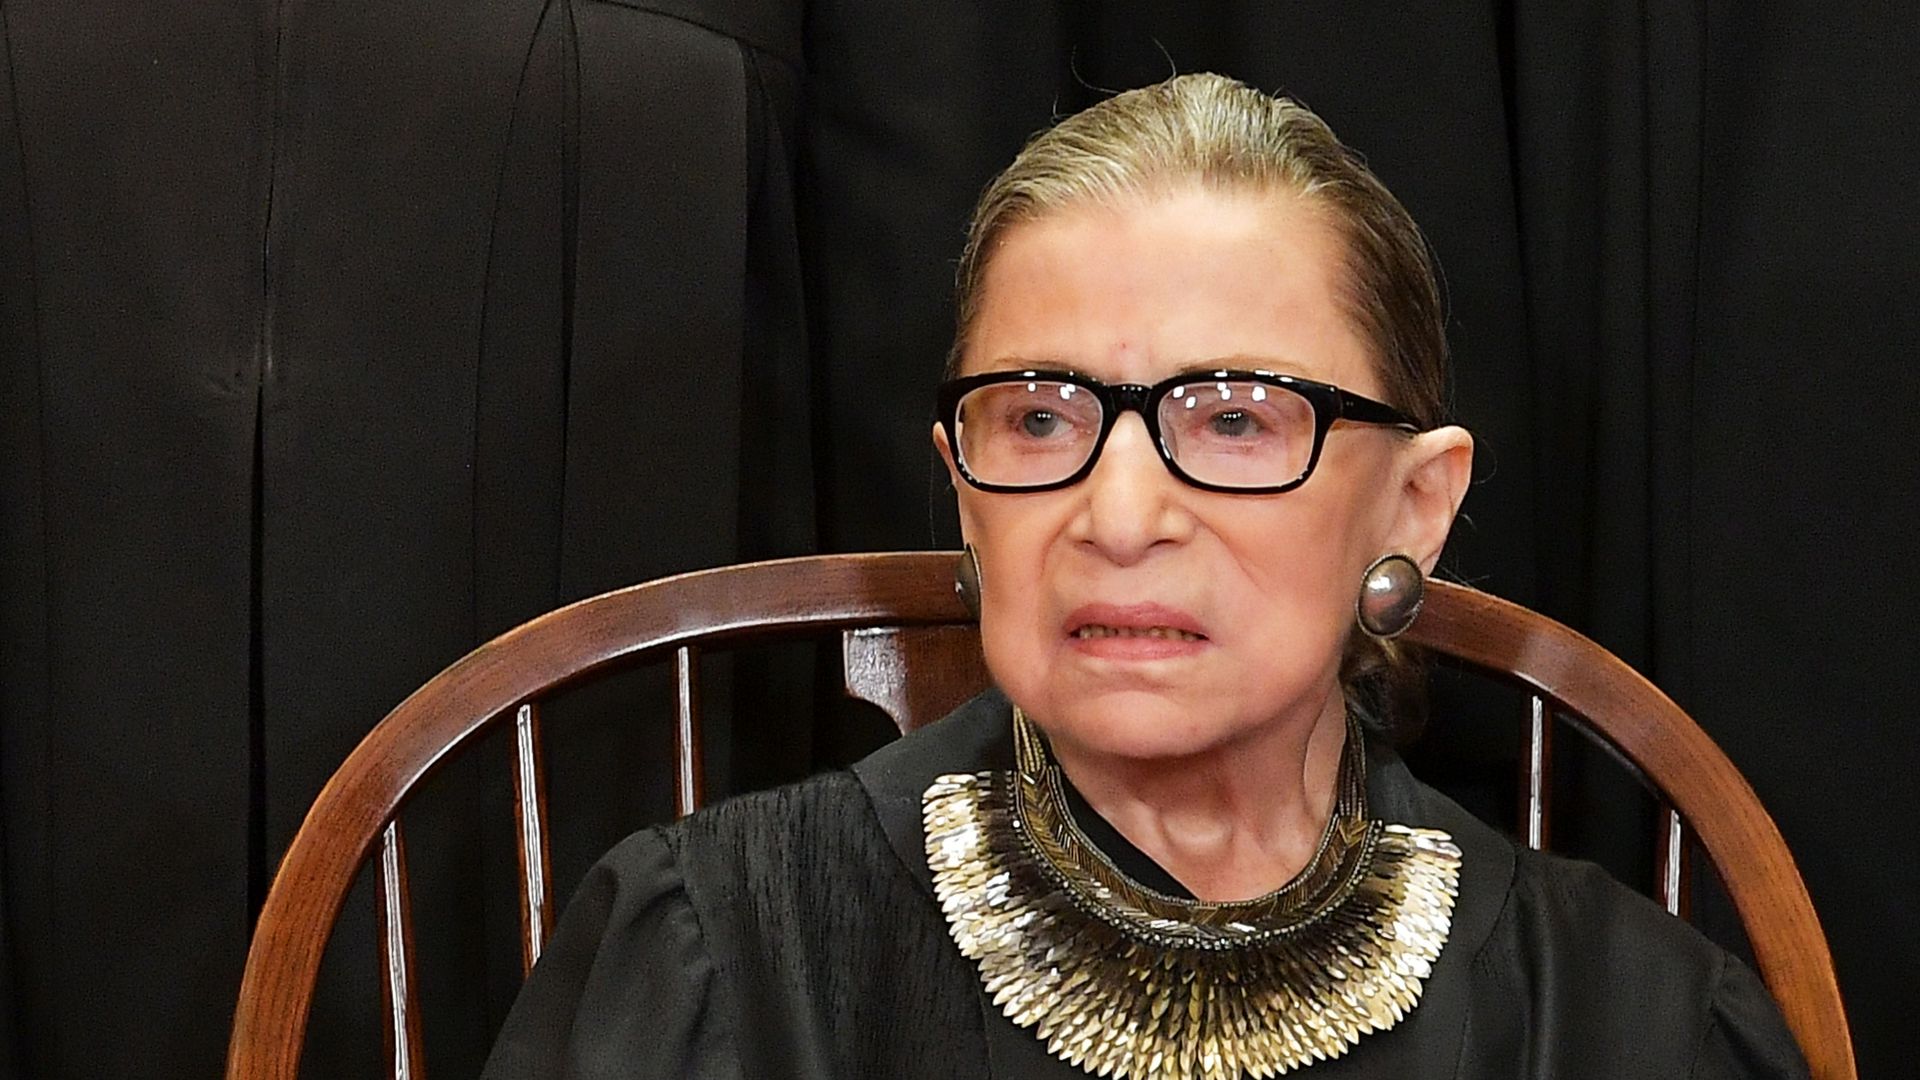 Ruth Bader Ginsburg in her garb 